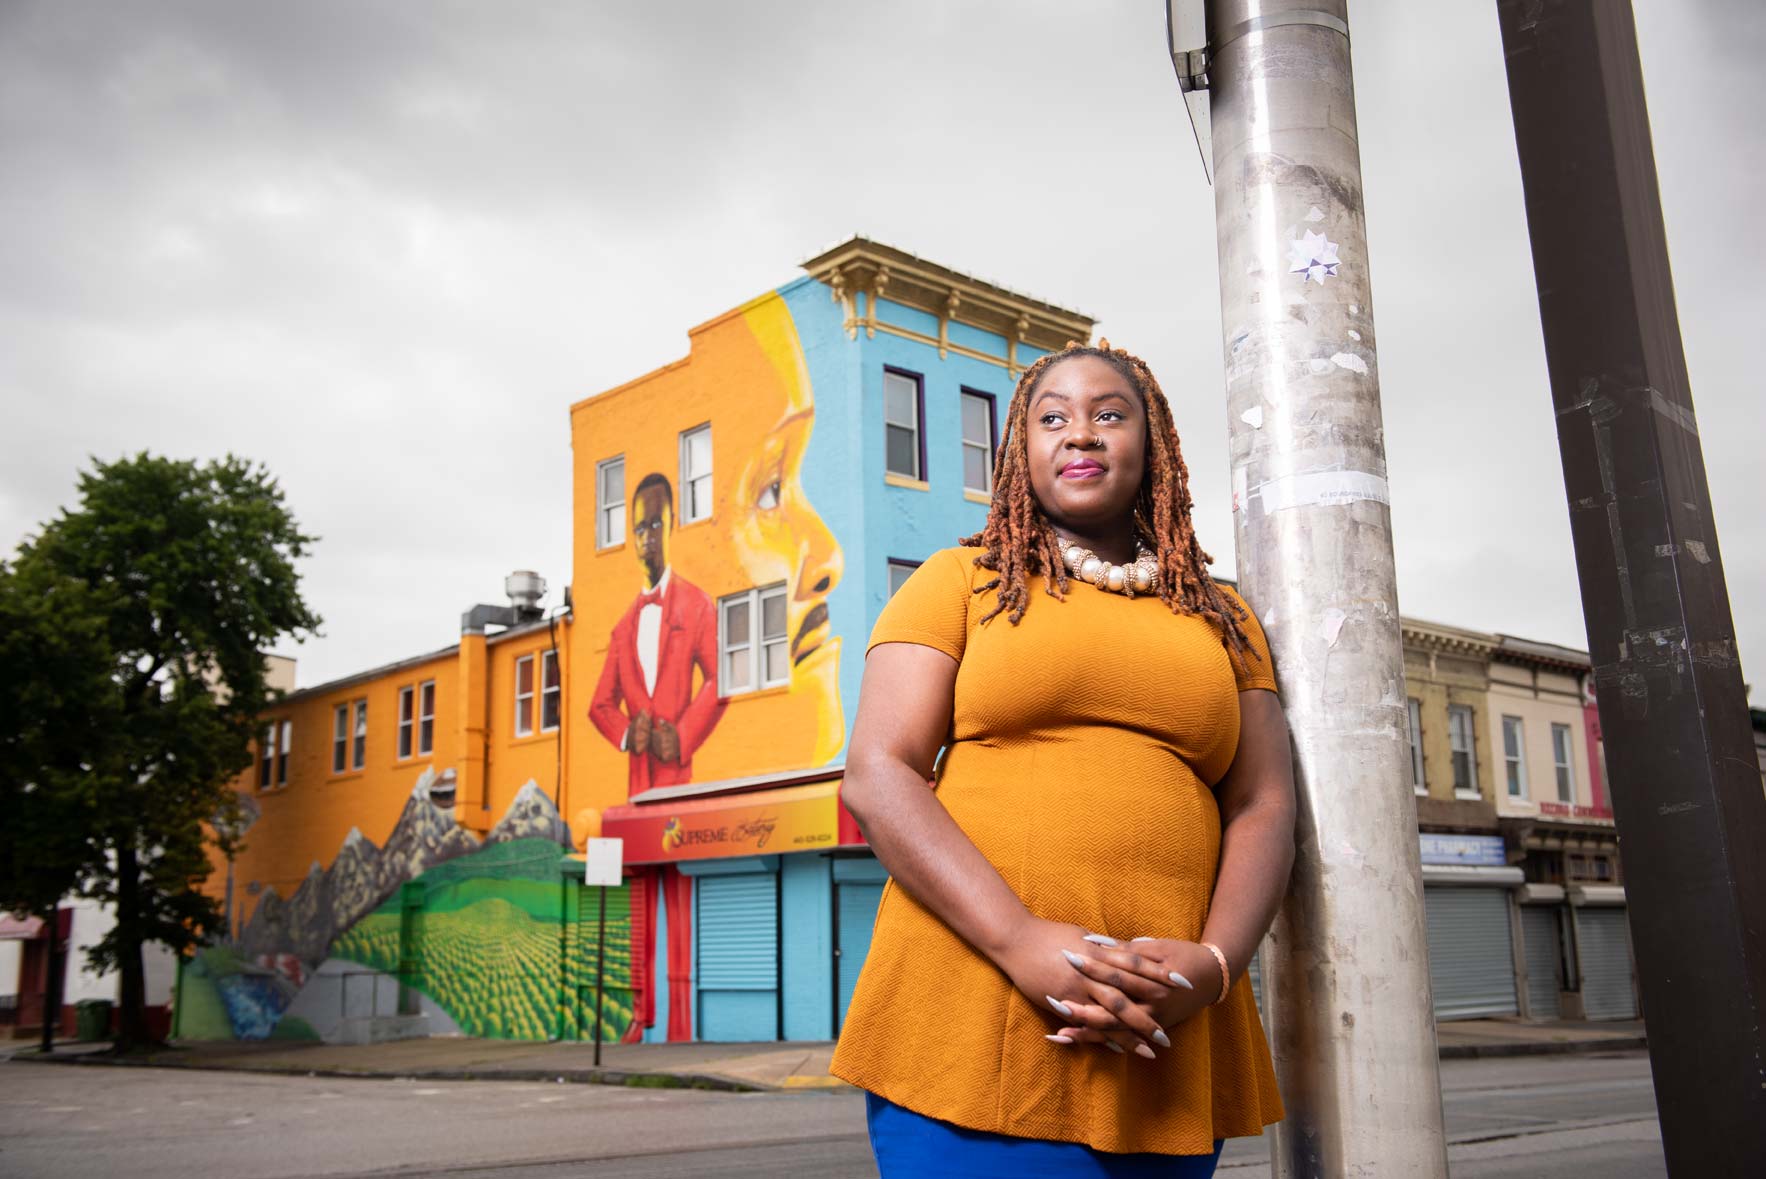 Lady Brion standing leaning against a post on a Baltimore street corner across from a colorful mural